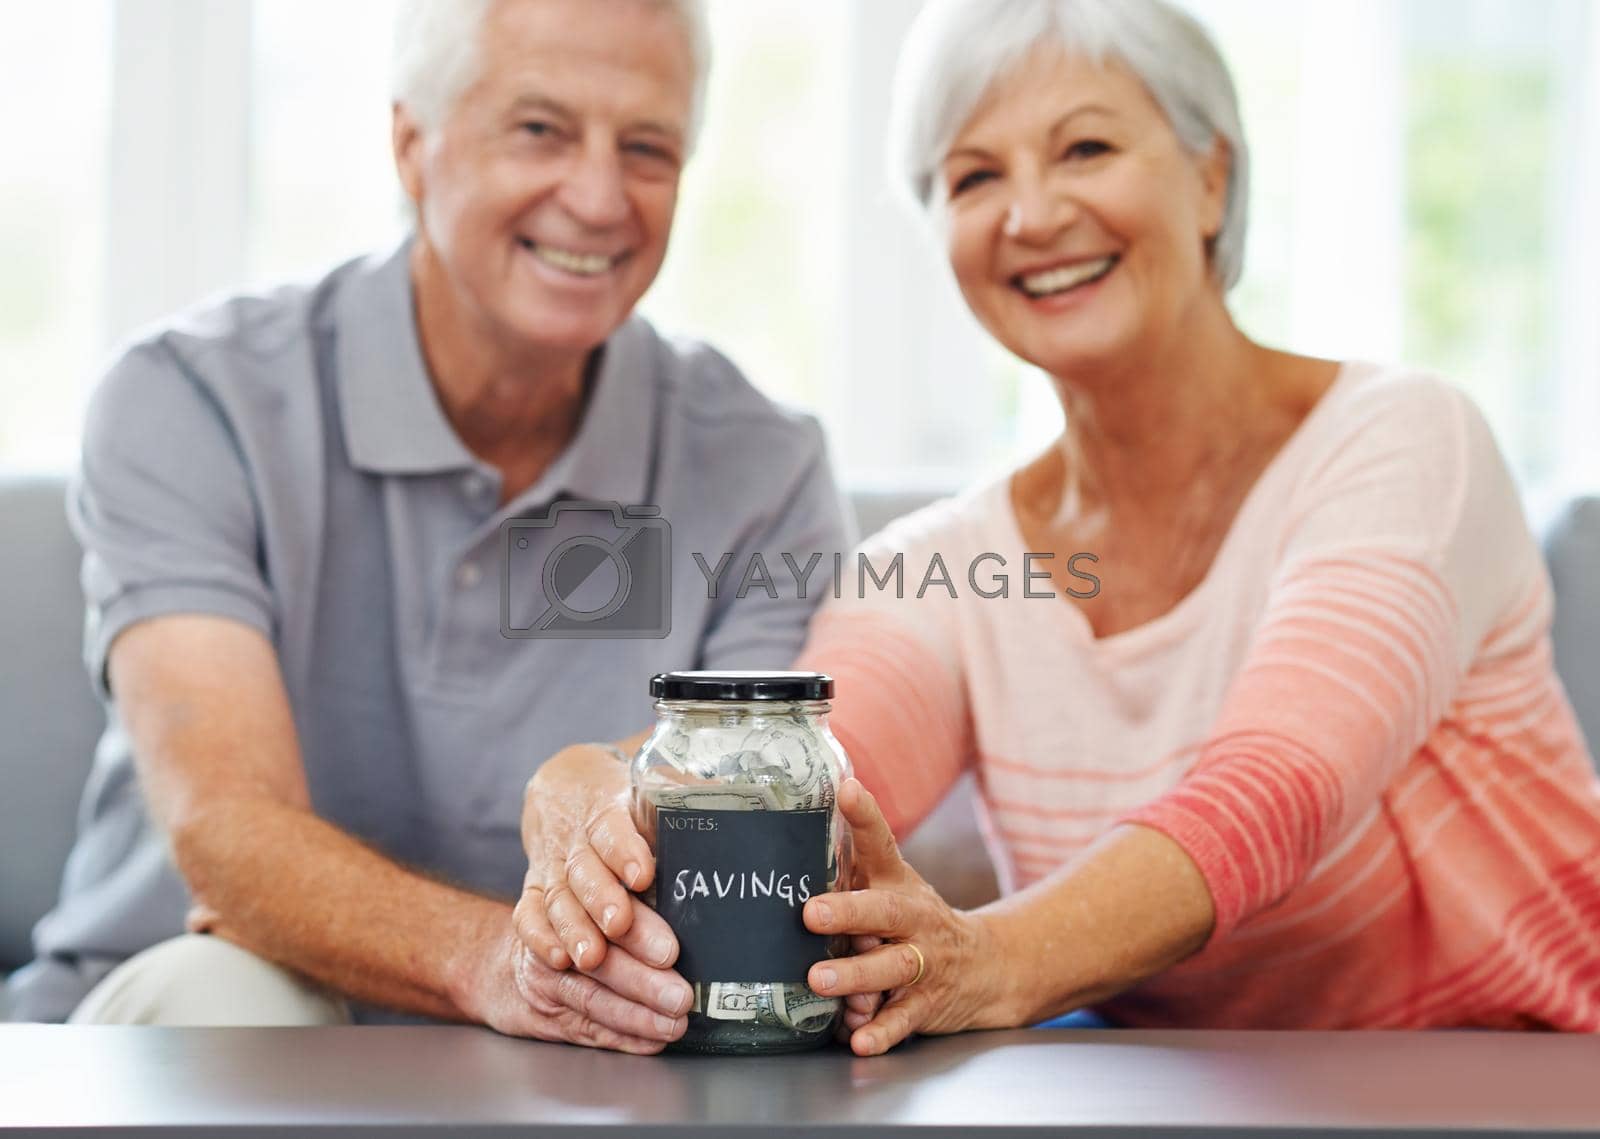 Royalty free image of Look how far weve come. Shot of a senior couple proudly posing with their savings jar. by YuriArcurs